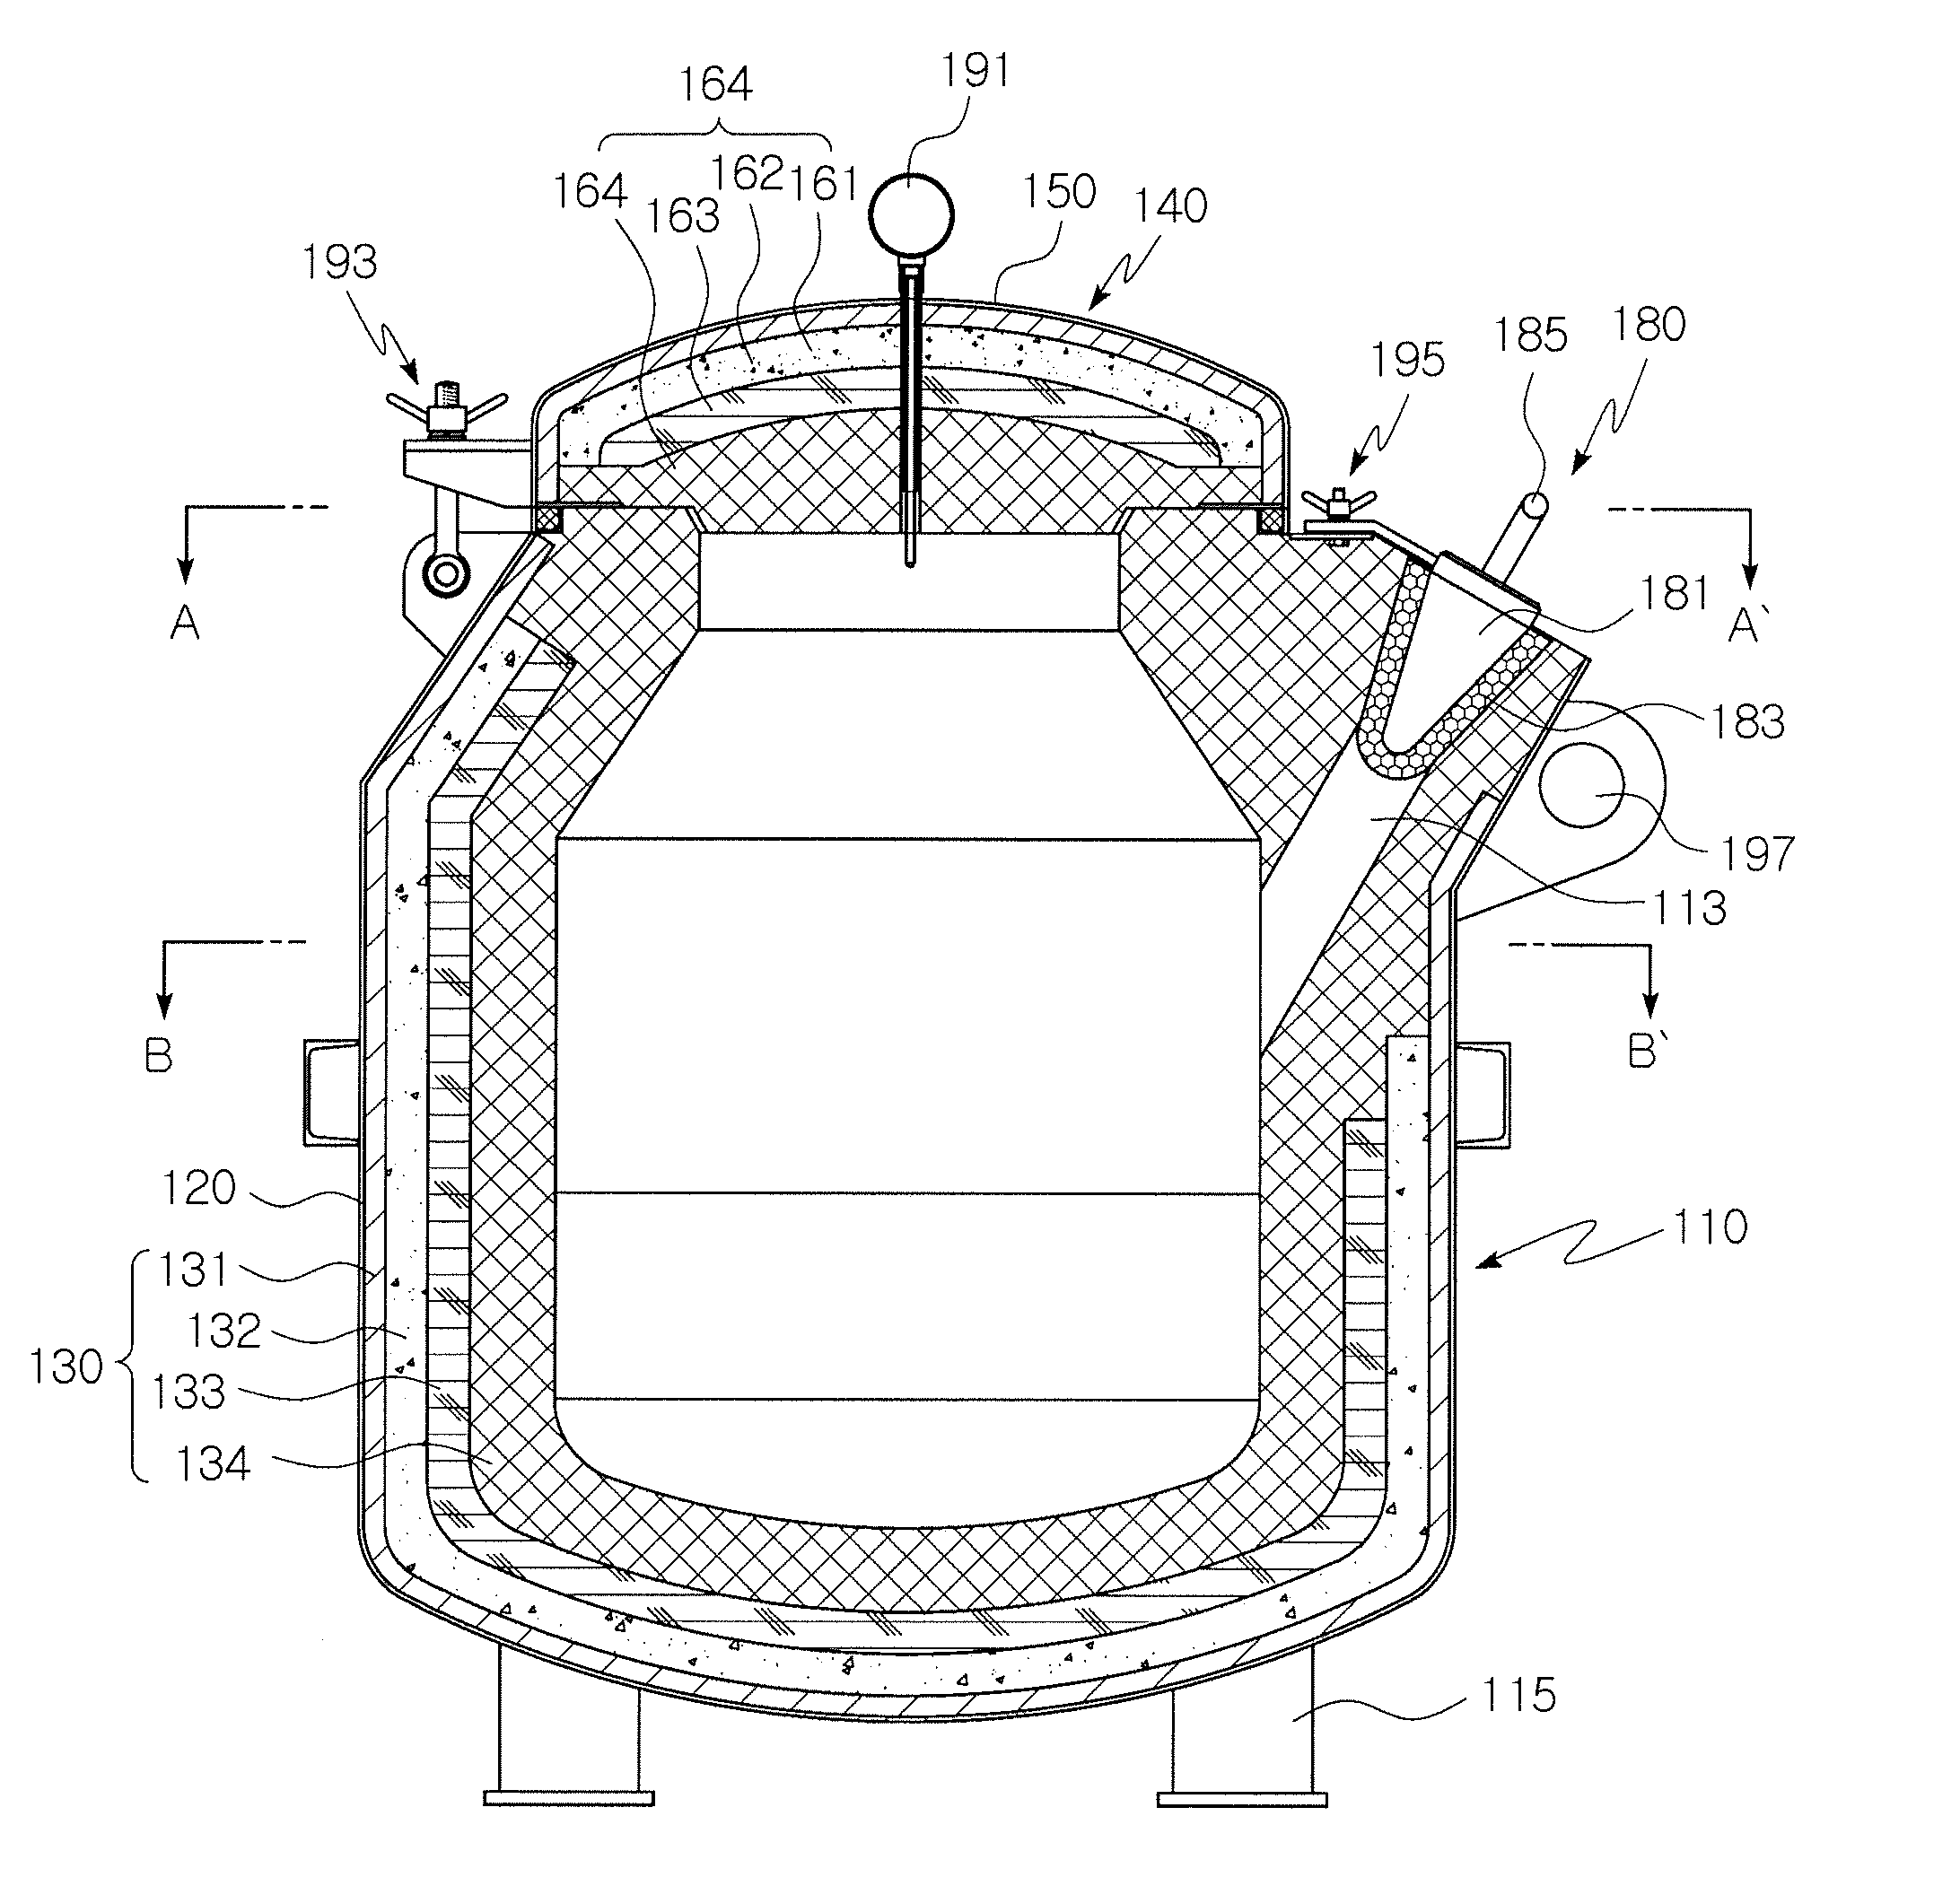 High-heat-retention ladle for carrying molten aluminum